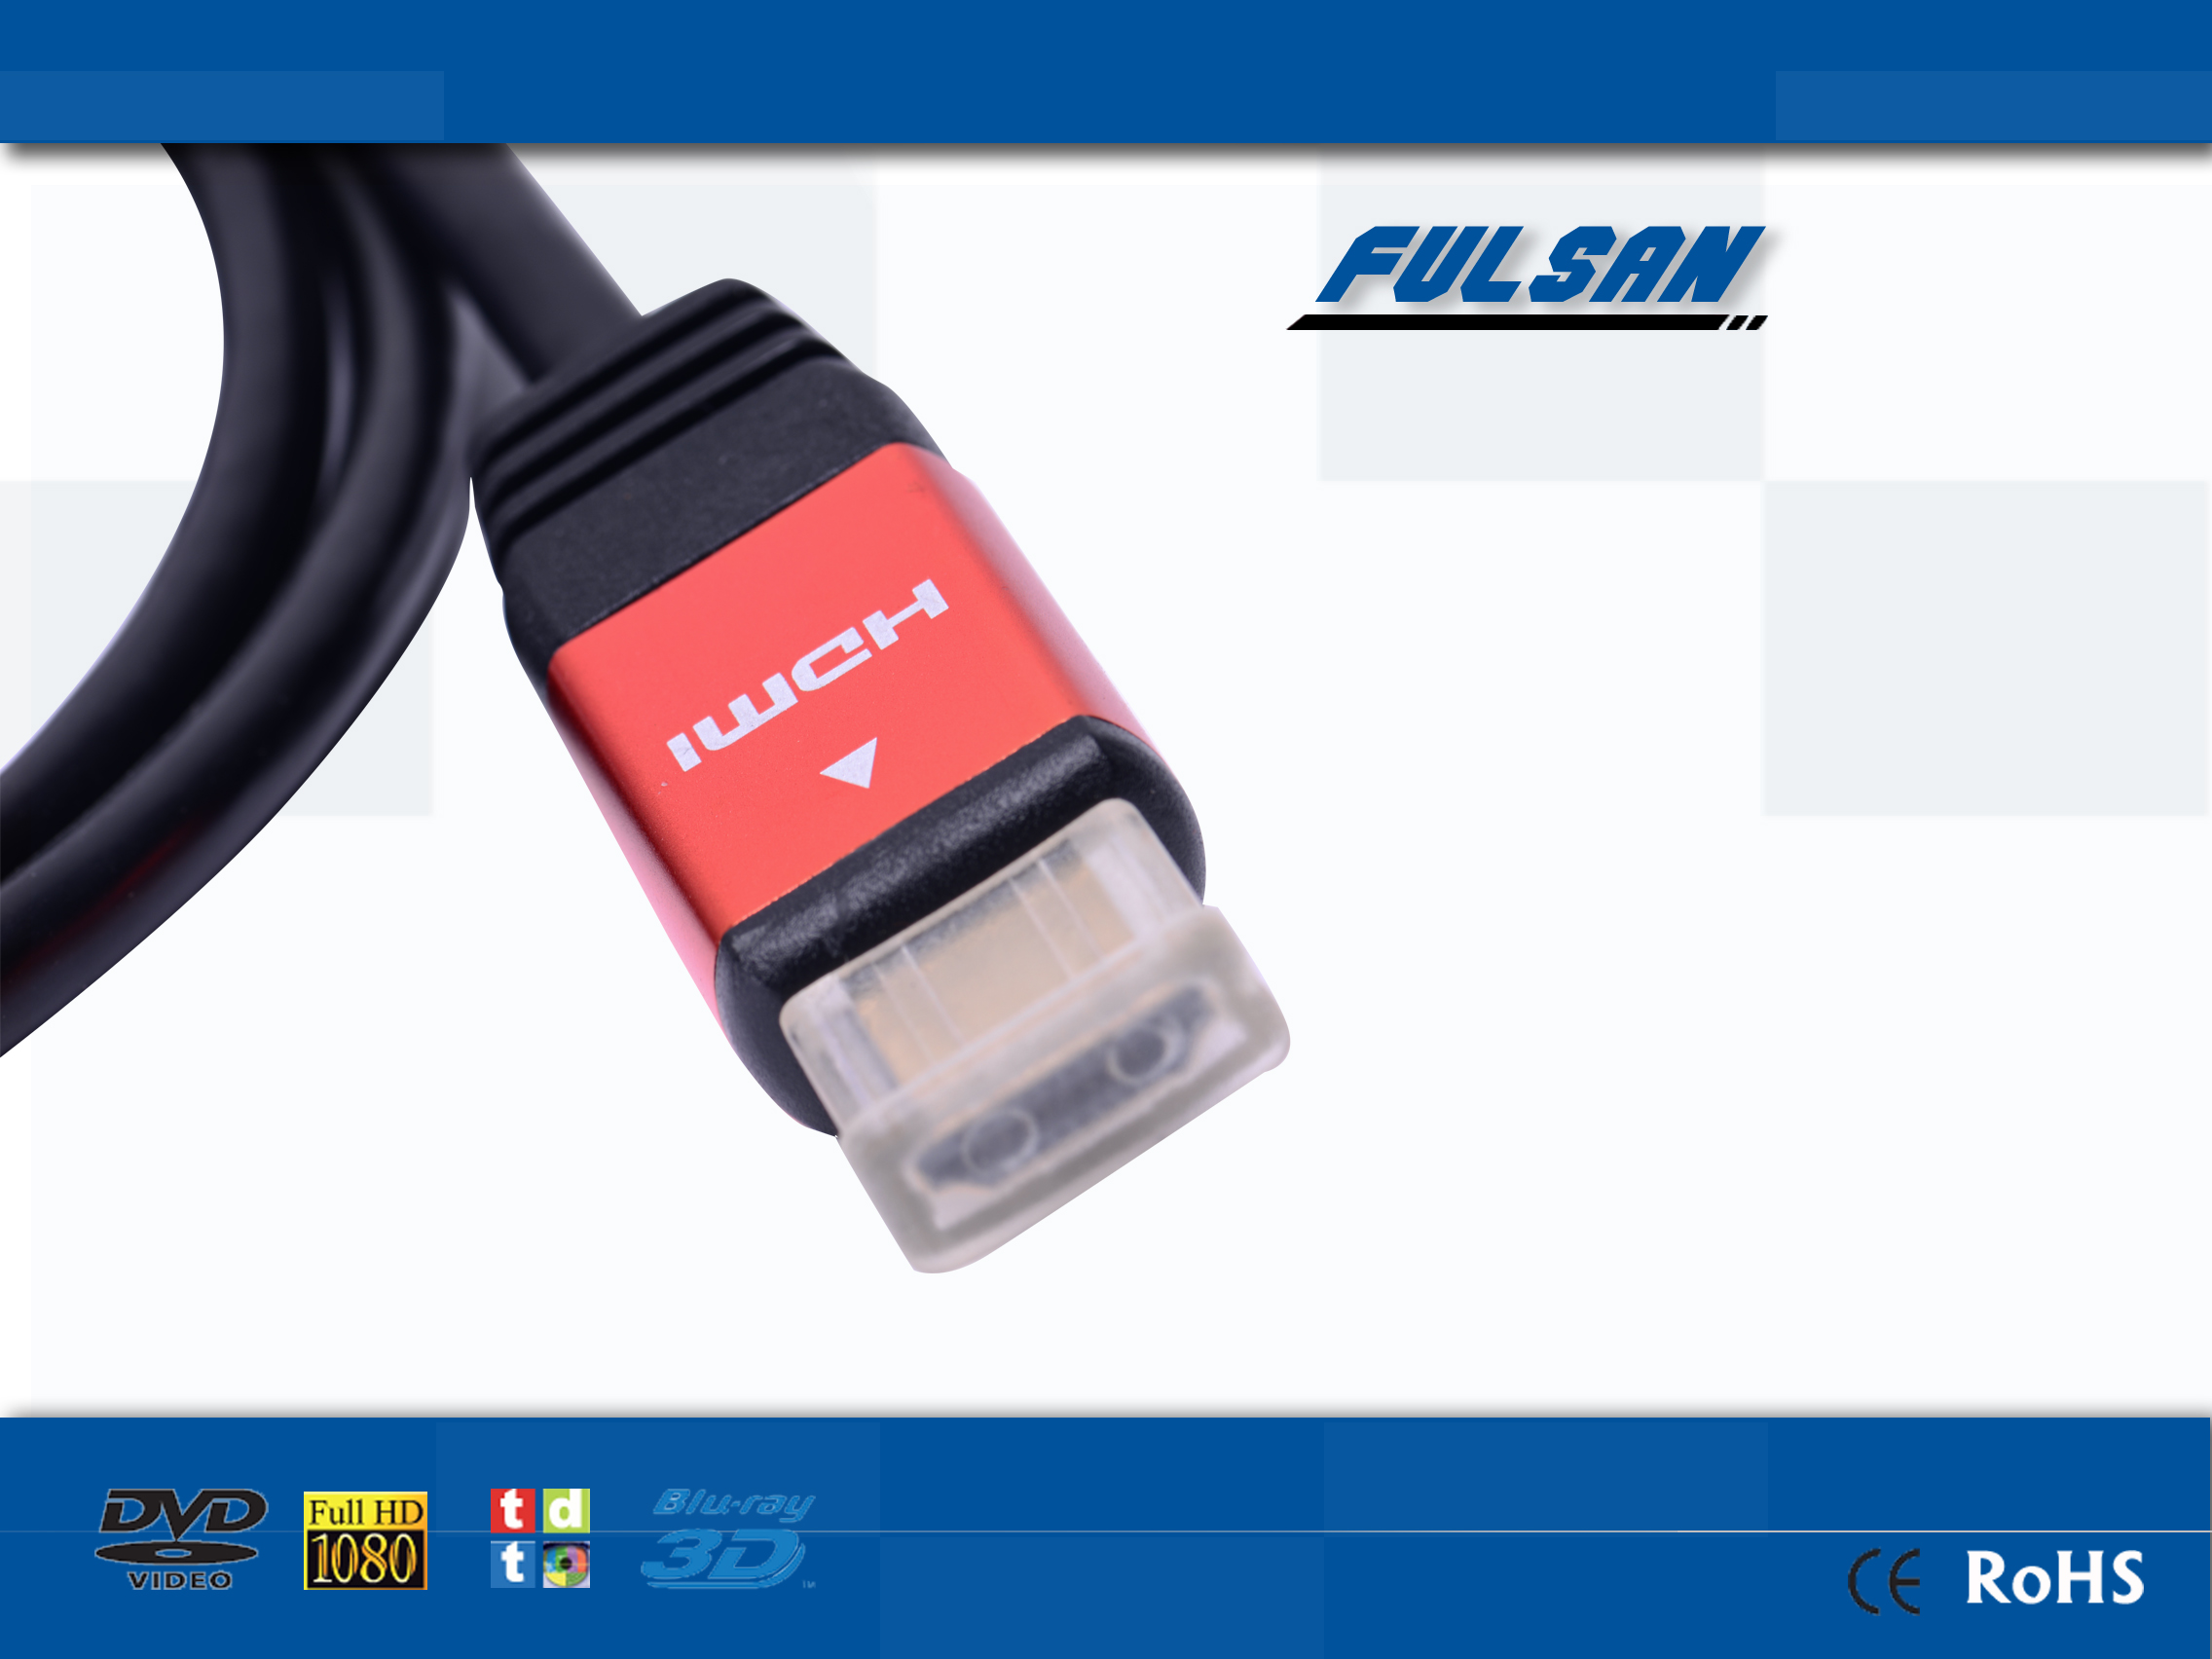 Lightning To Hdmi Cable